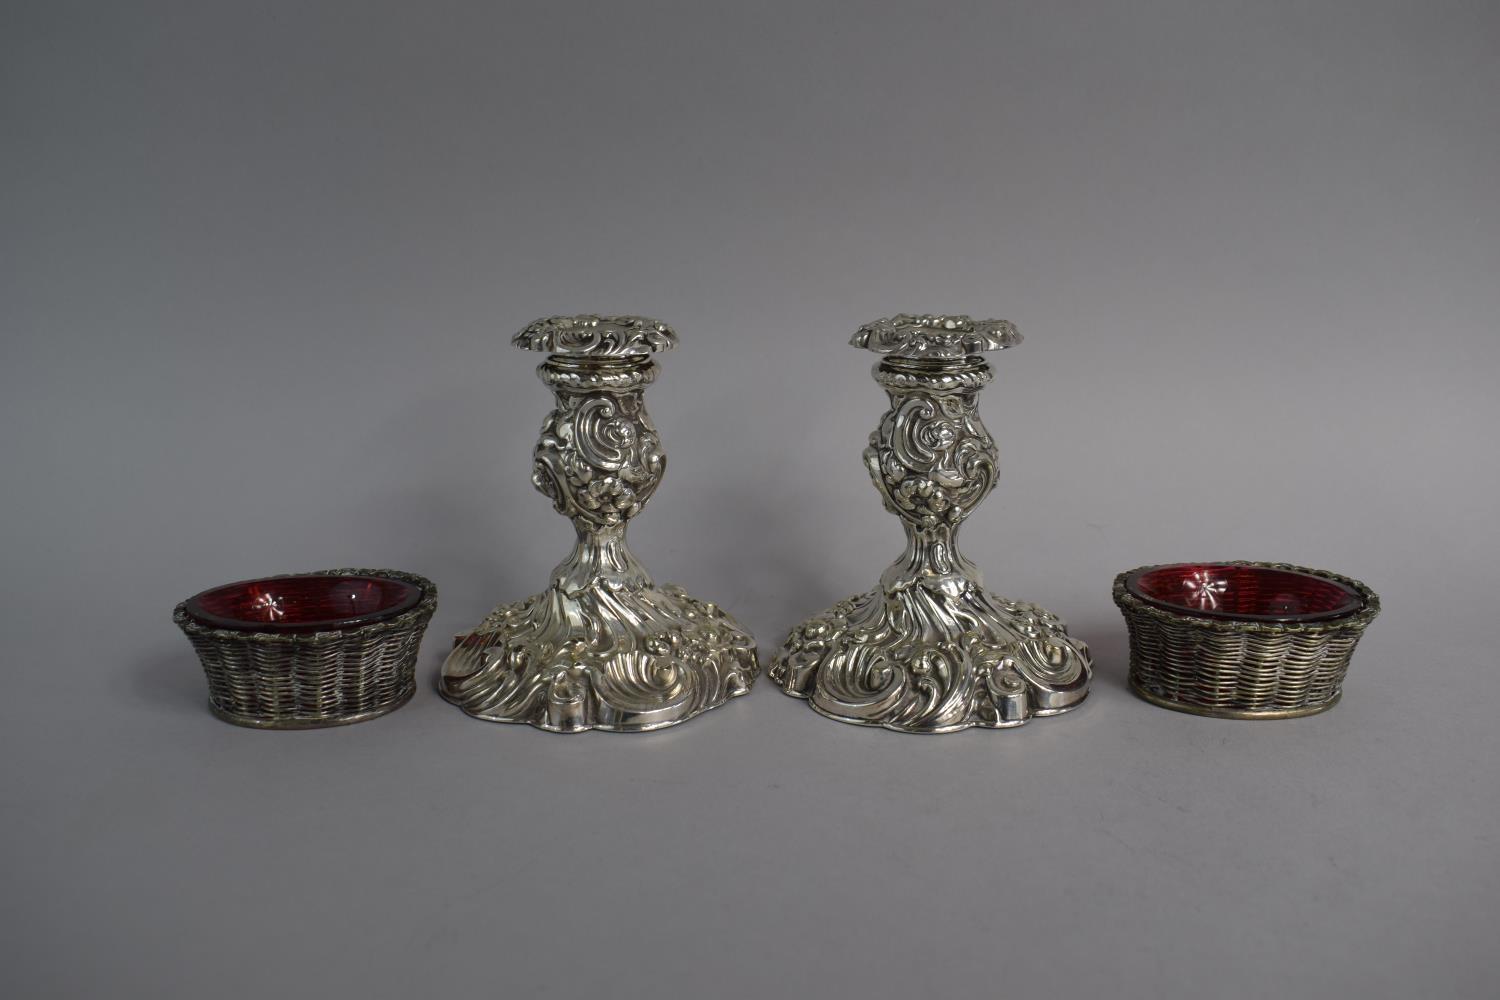 A Pair of Silver Plated Rococo Style Candlesticks Together with a Pair of Silver Plated Salts in the